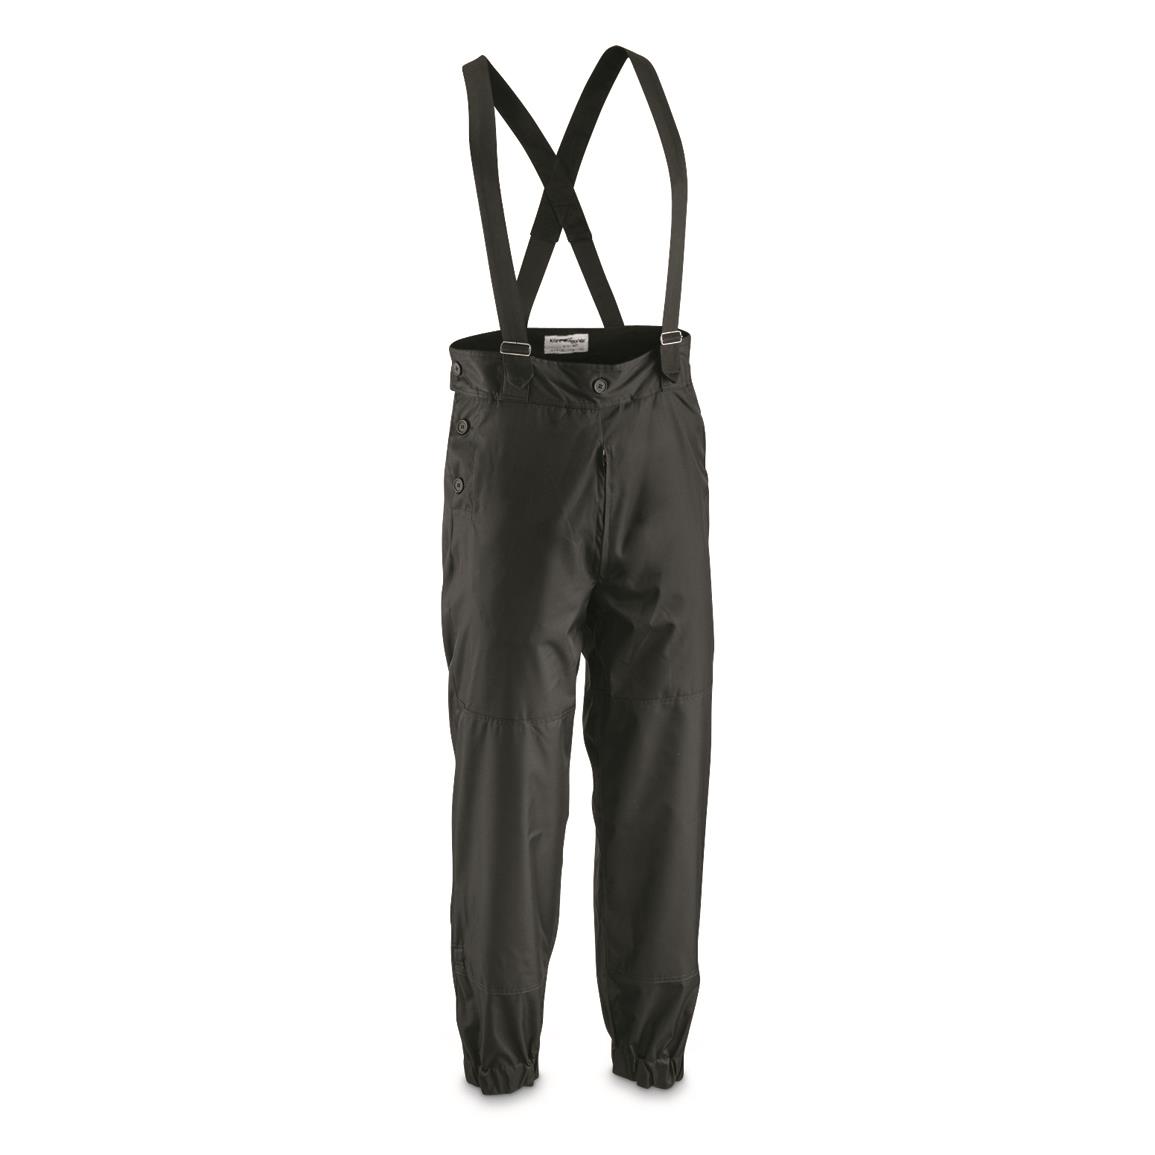 U.S. Army Surplus Extreme Cold Weather Insulated Pants